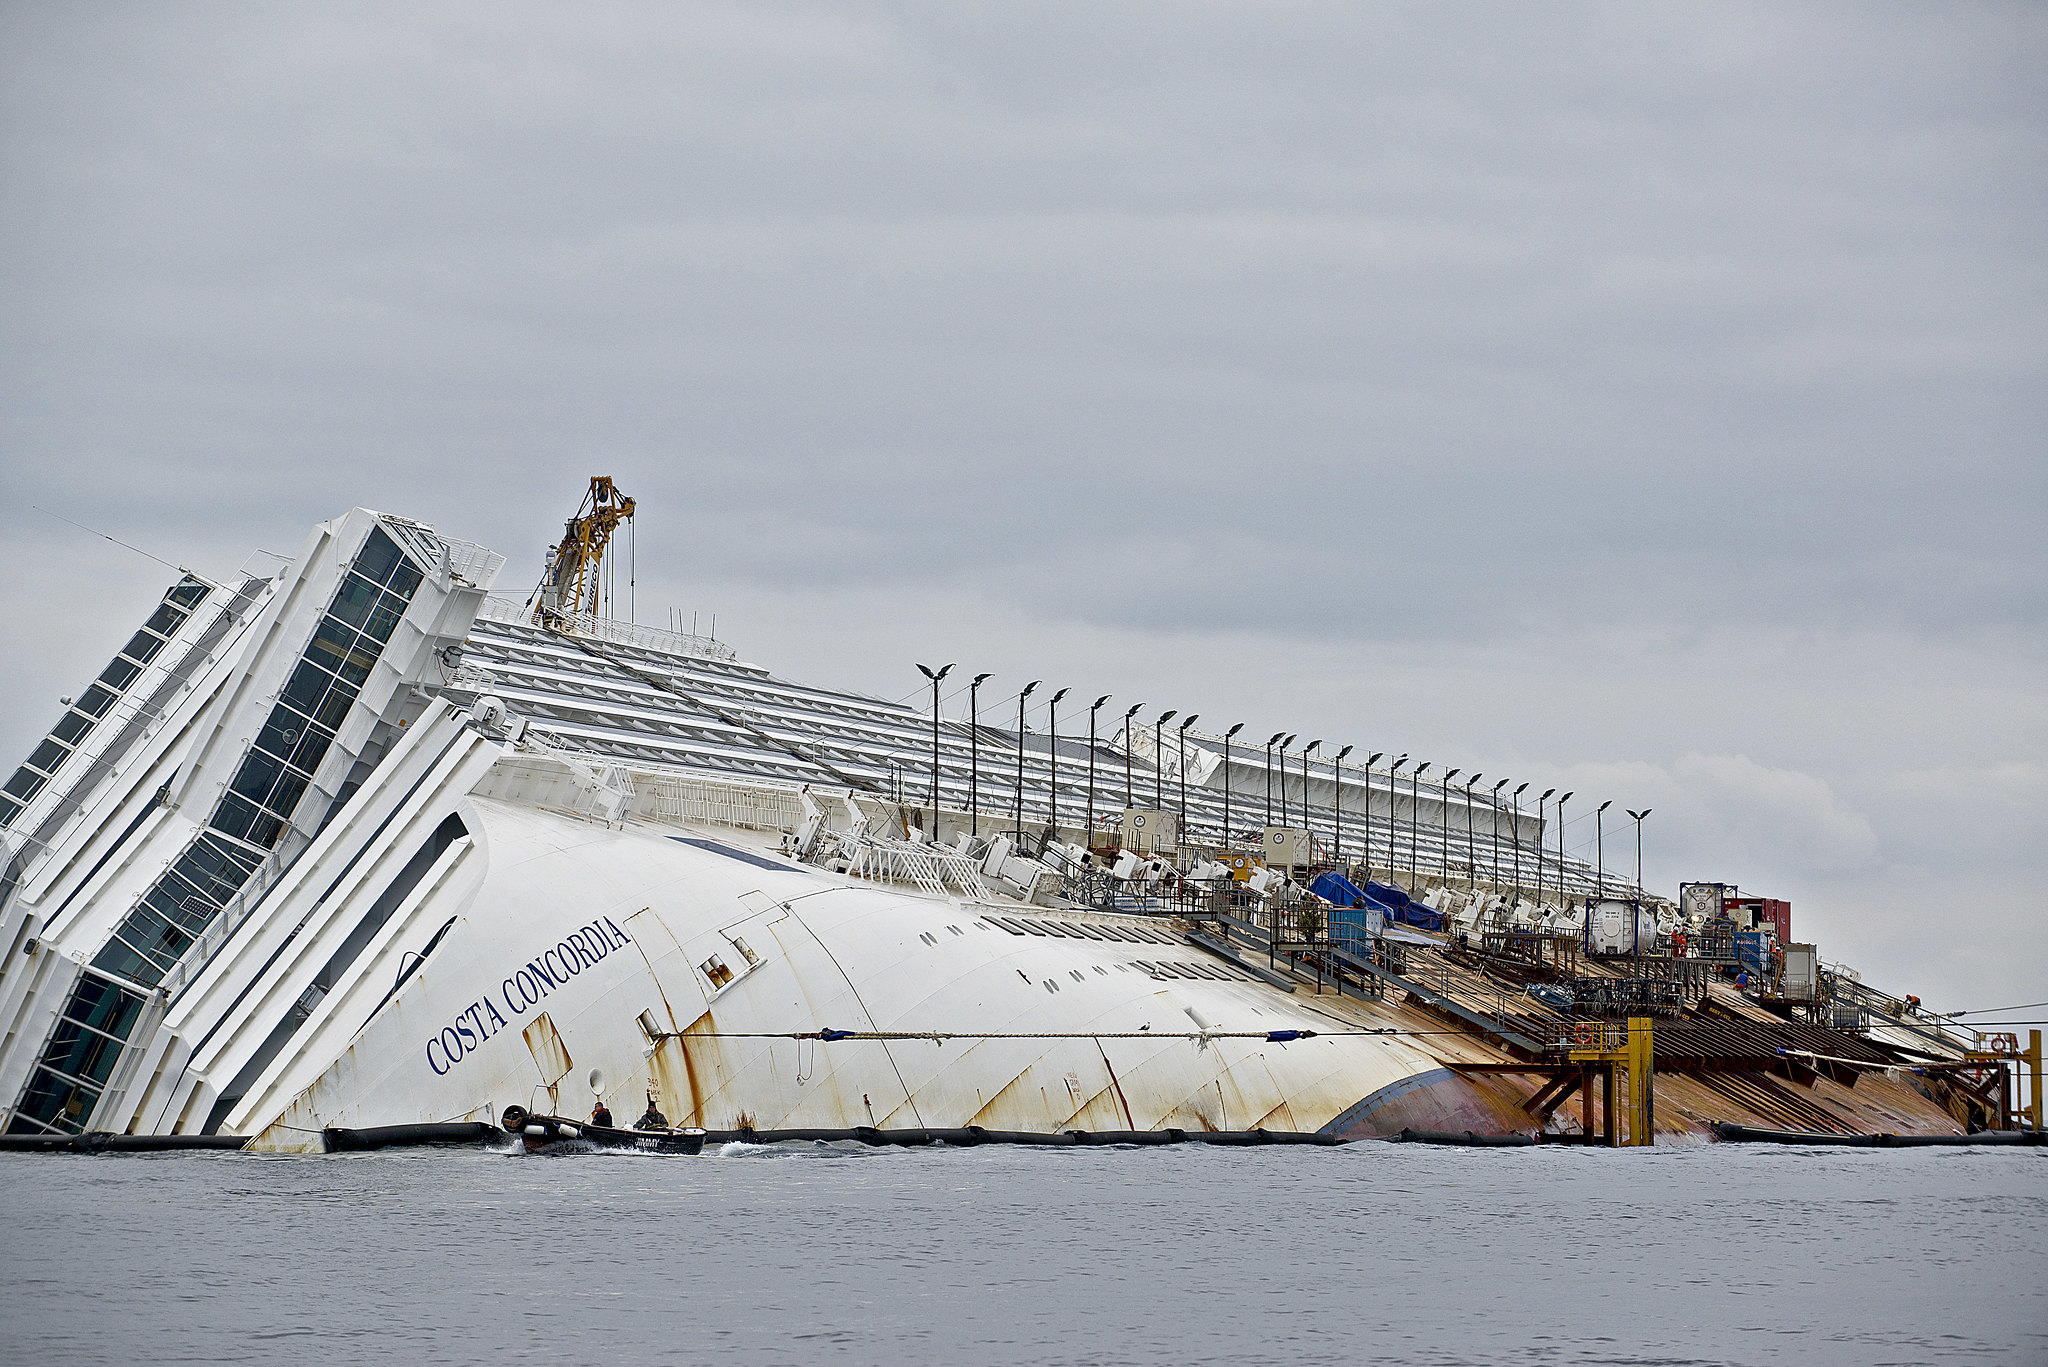 <p>The Costa Concordia actually tipped over after it took on water. There were a reported <strong>32 fatalities, 64 injured</strong> and <strong>one person missing</strong> and never found.</p>